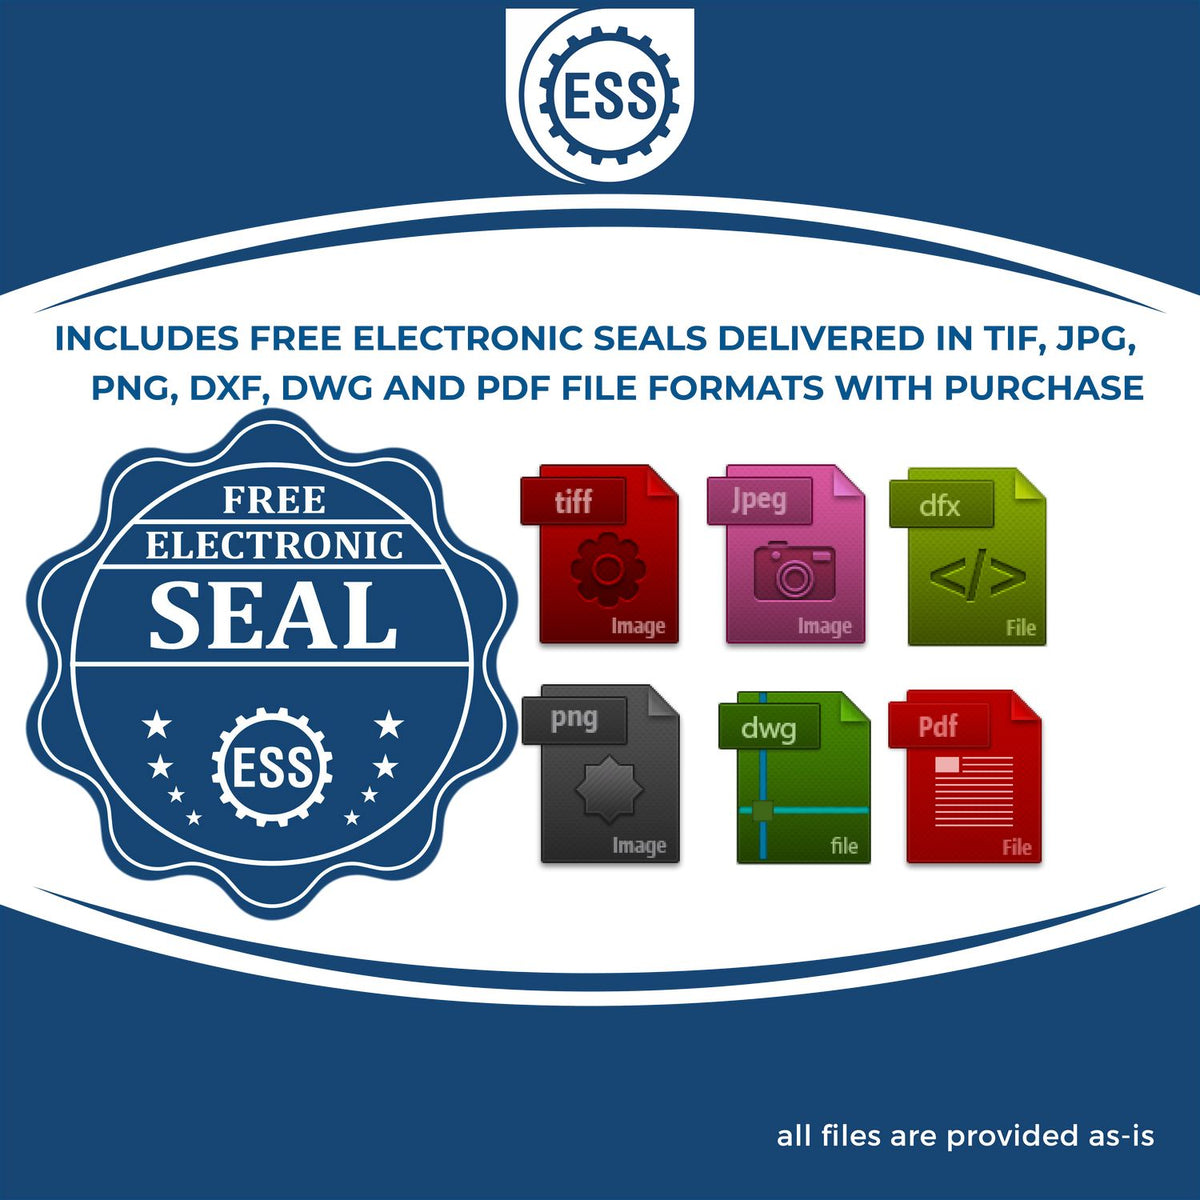 An infographic for the free electronic seal for the Hybrid Colorado Architect Seal illustrating the different file type icons such as DXF, DWG, TIF, JPG and PNG.